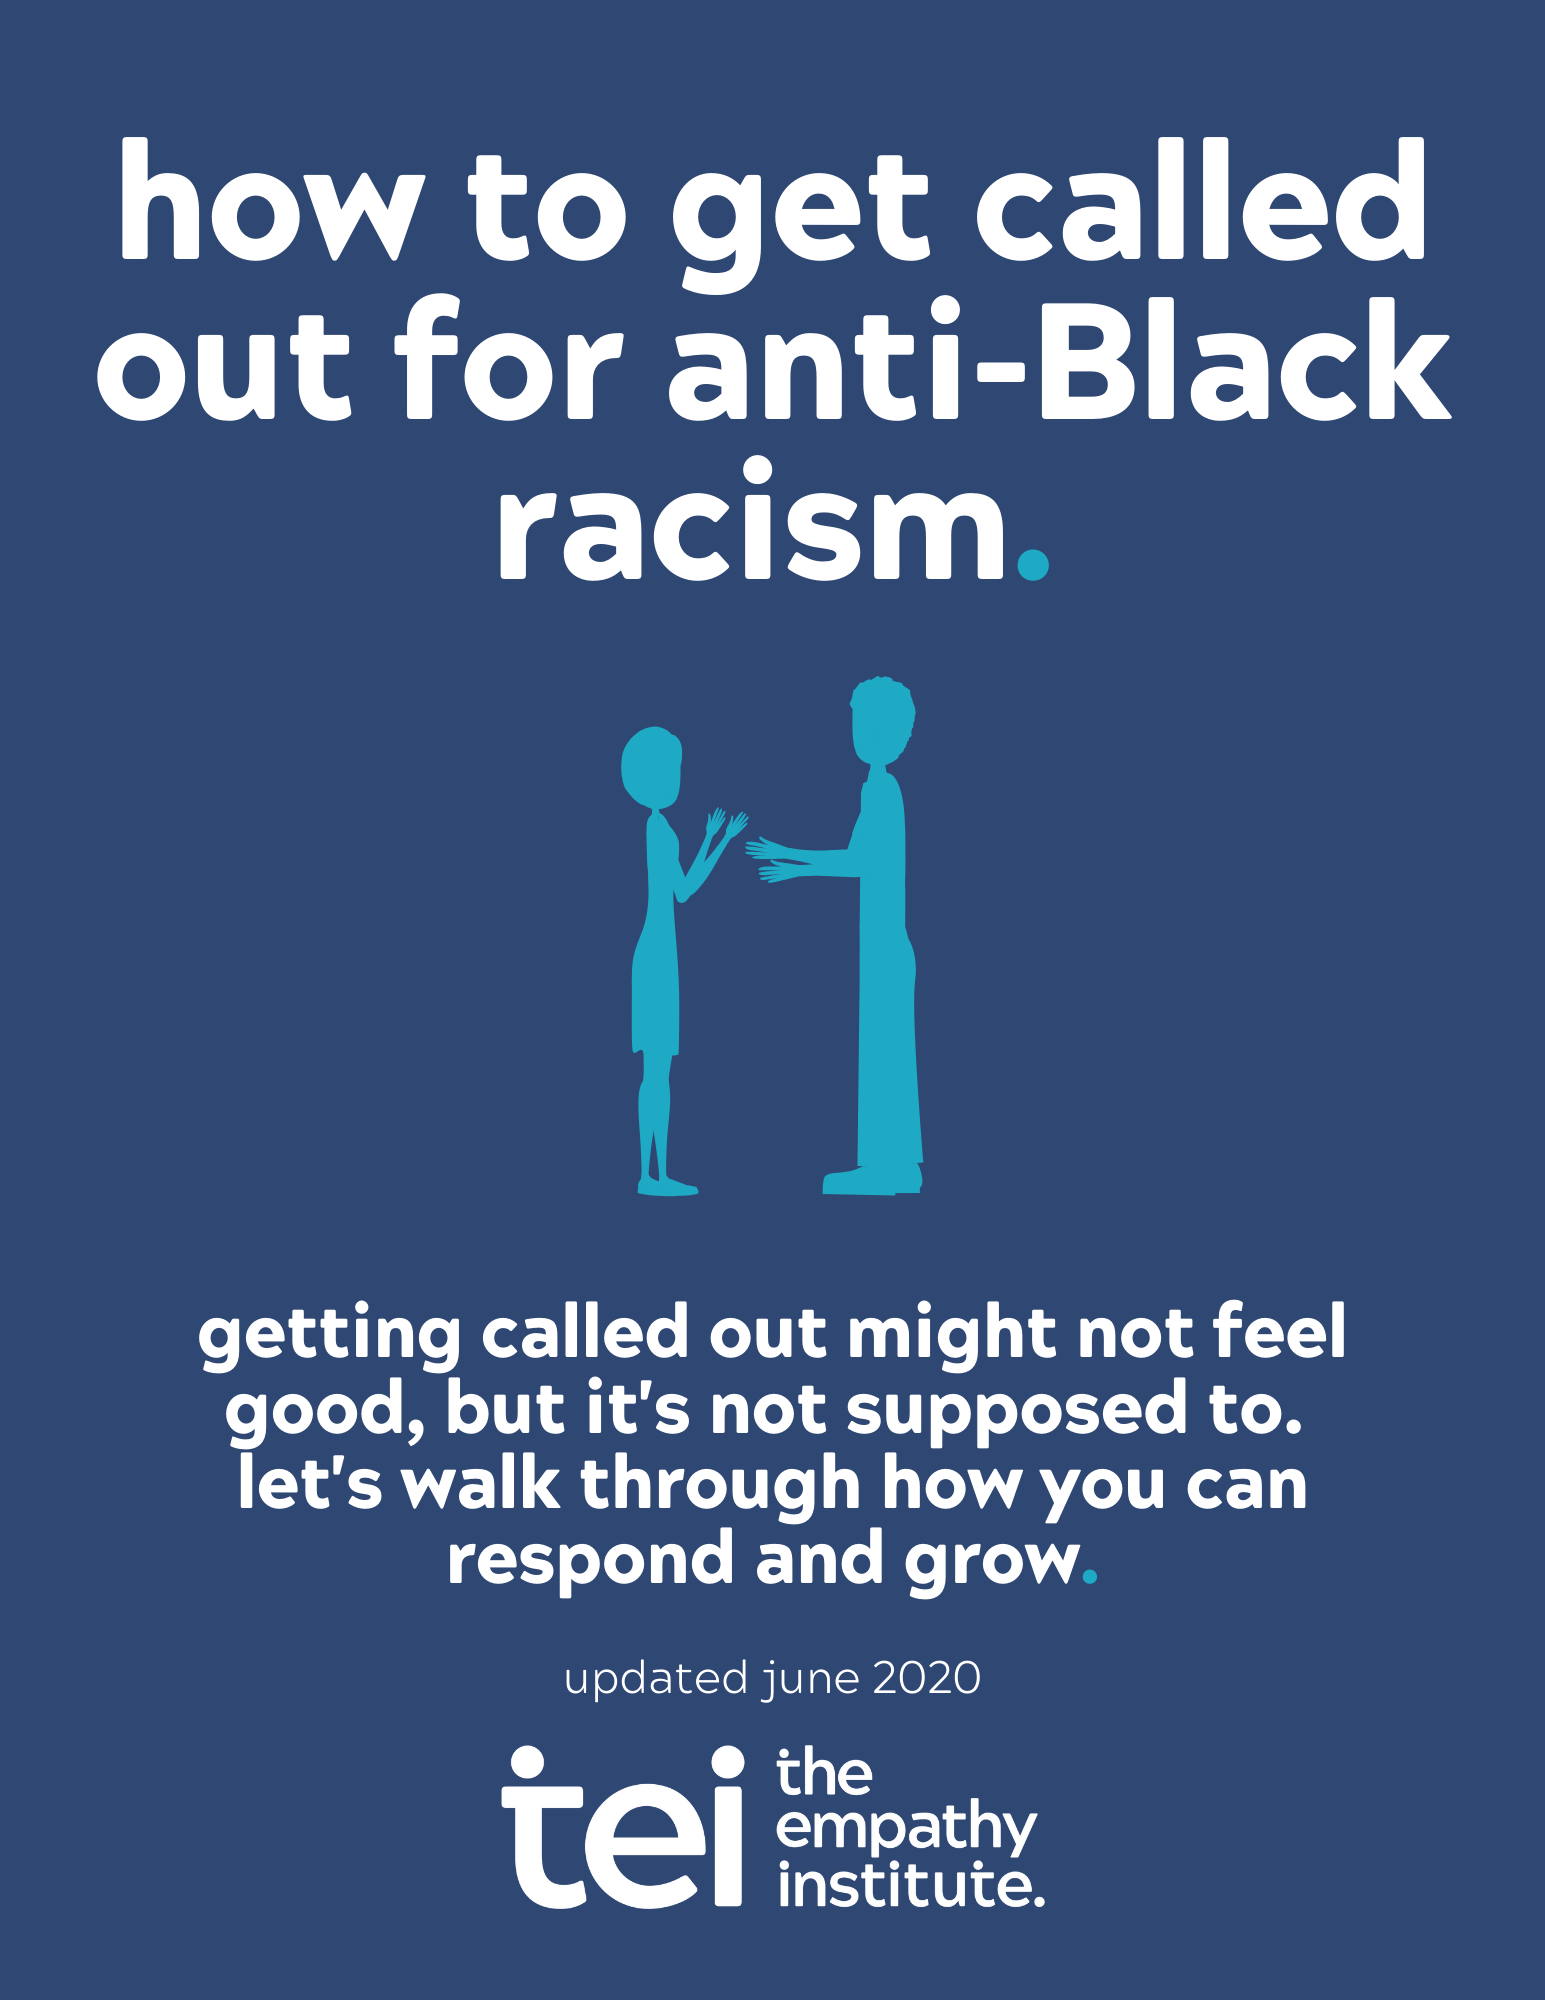 How to get called out for racism